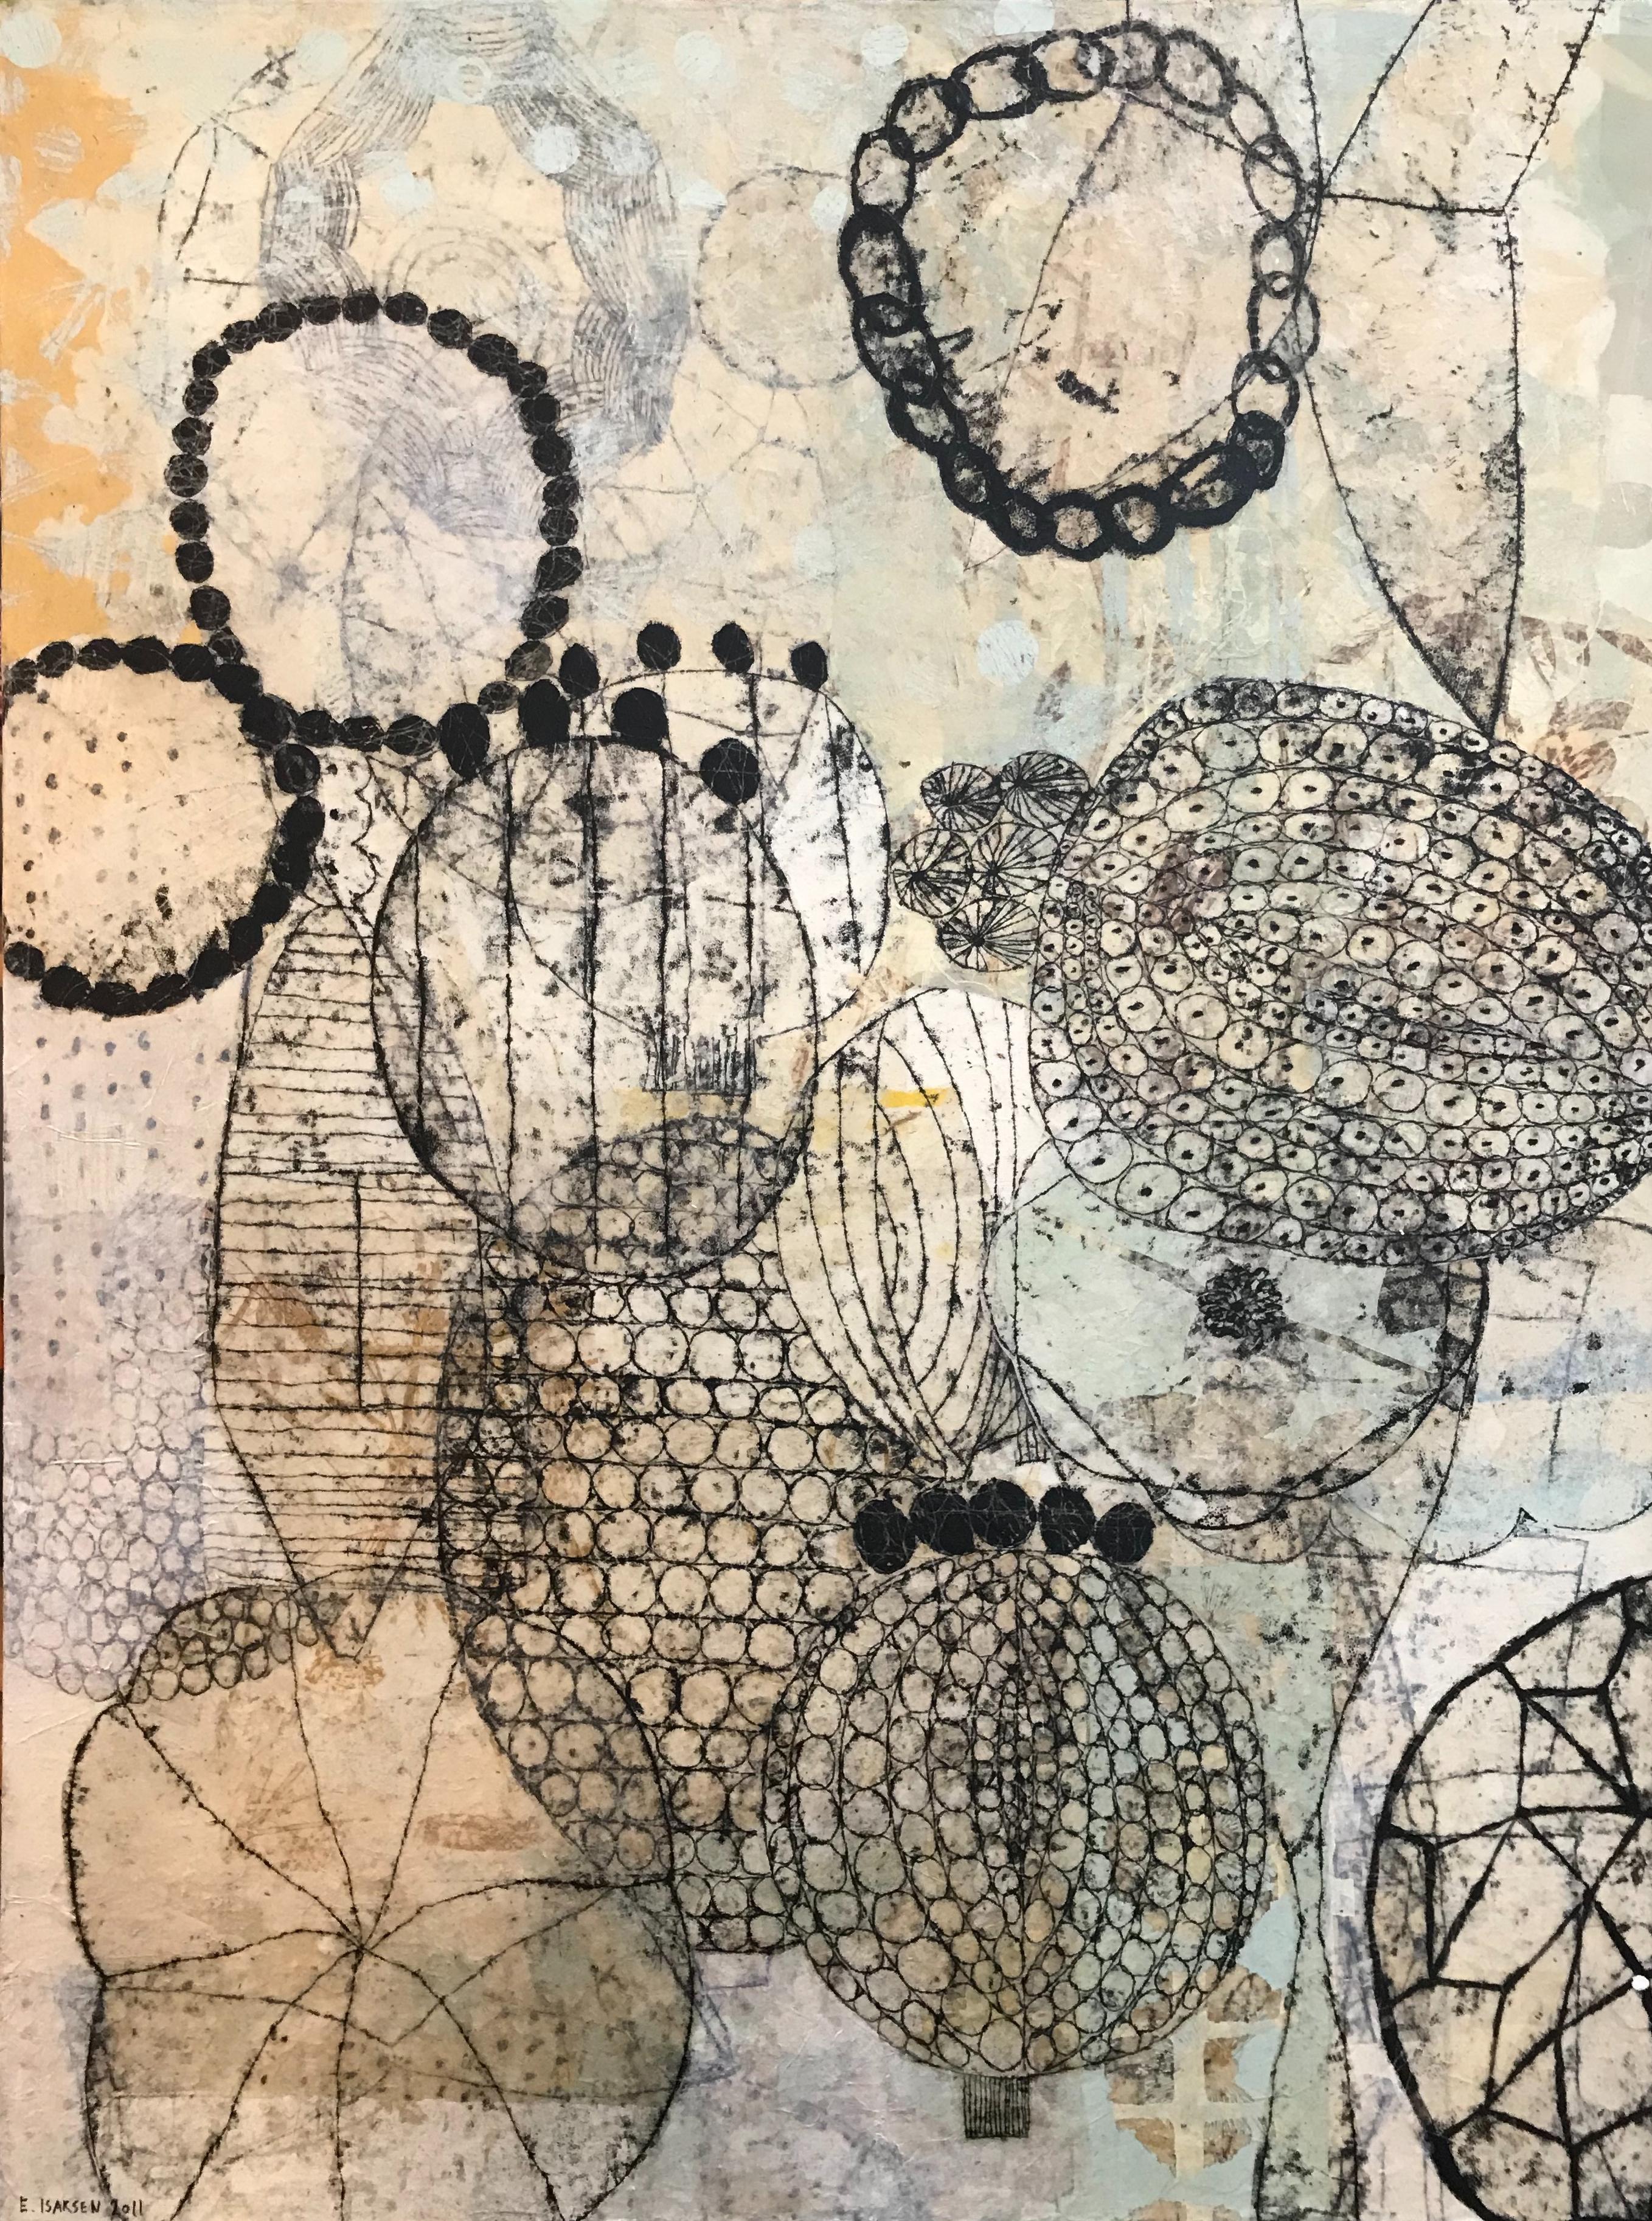 "Seeds and Beads", Contemporary, Mixed Media, Collage, Canvas, Printmaking - Mixed Media Art by Eva Isaksen